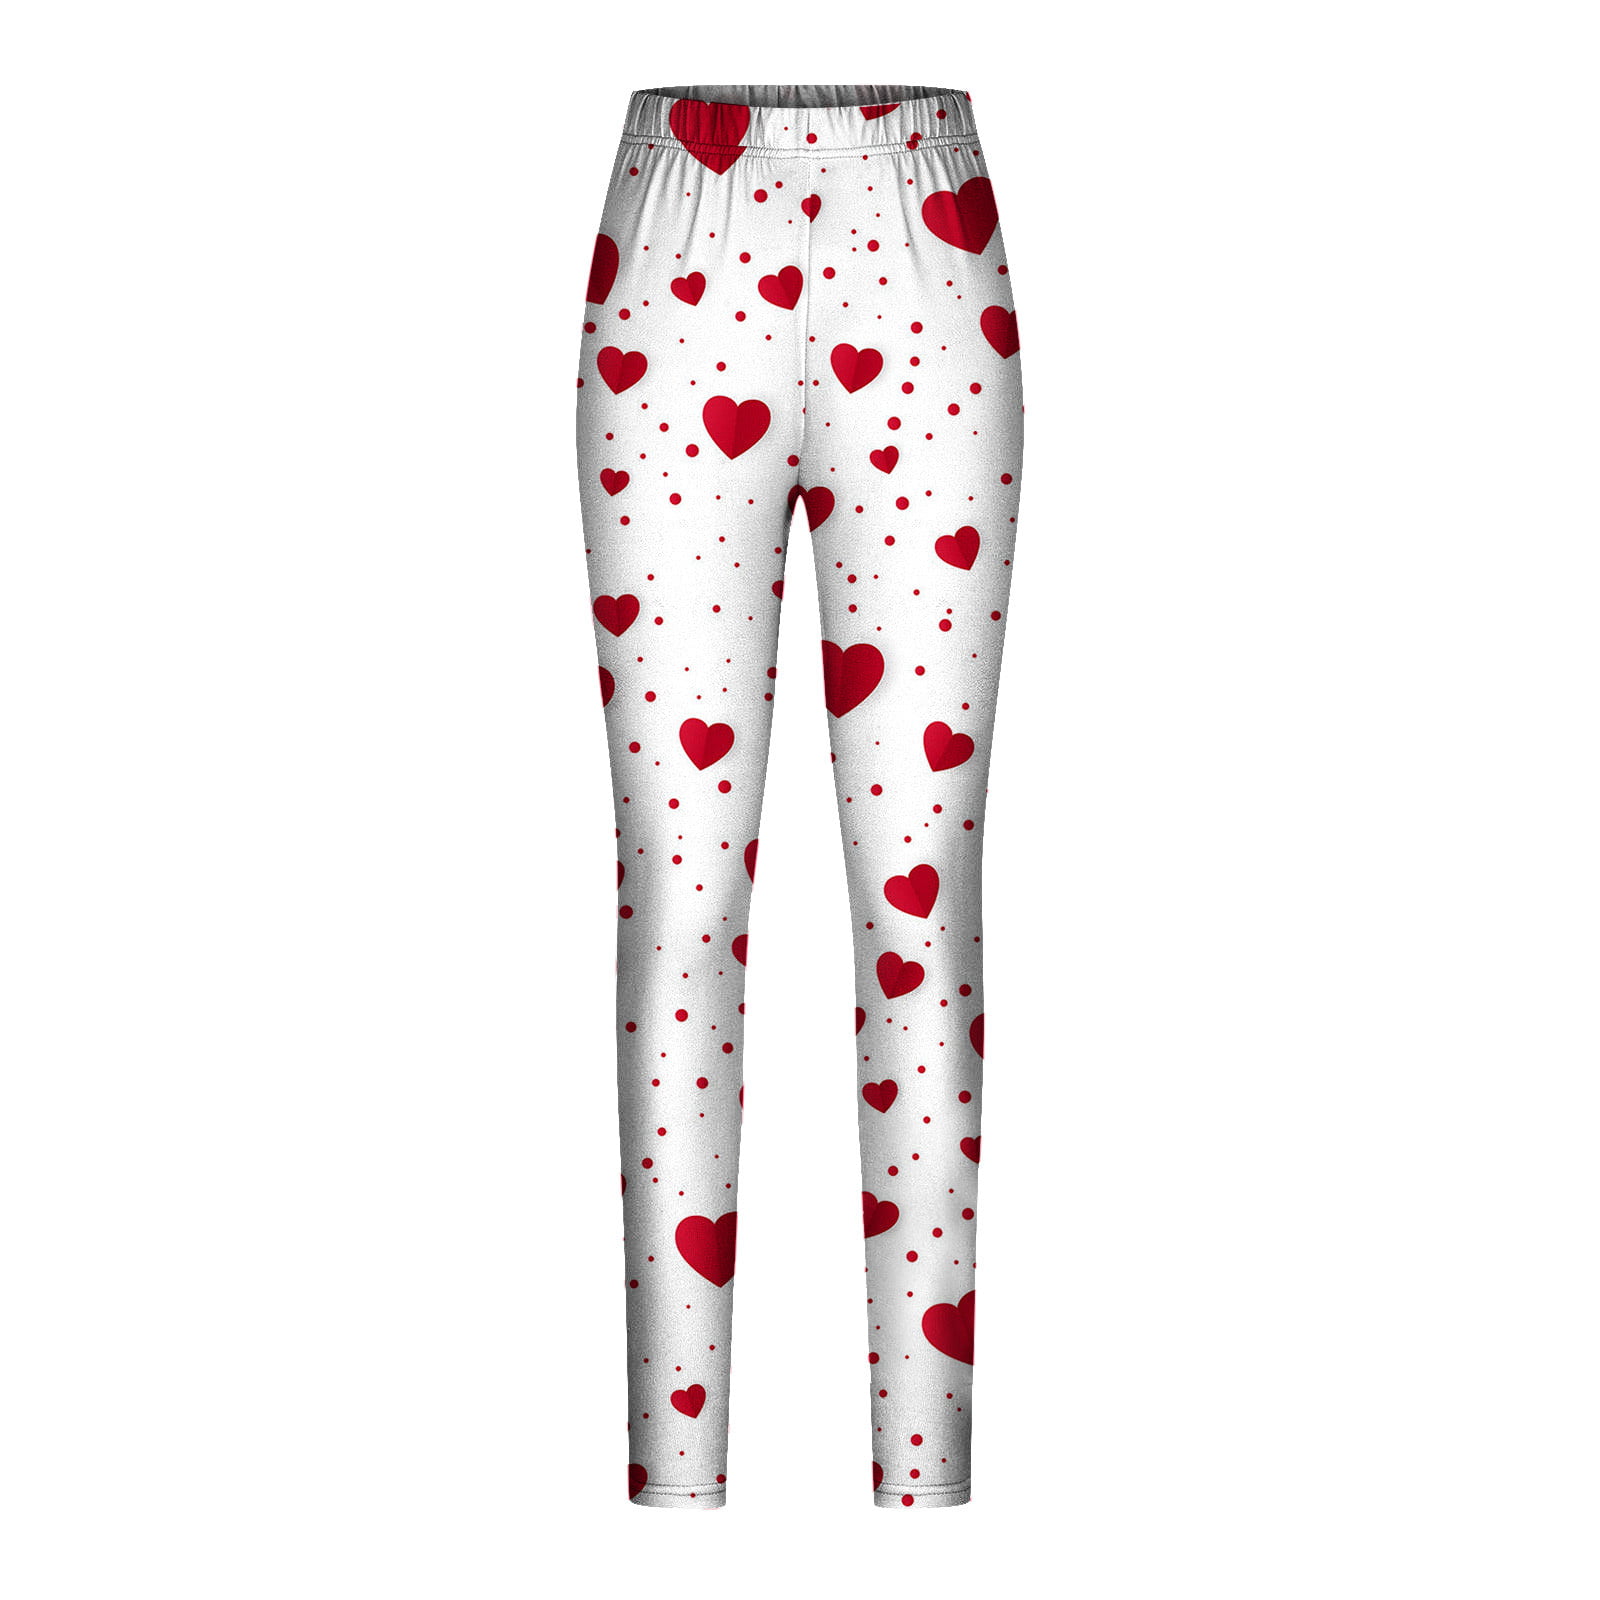 Hvyesh Women's Love Heart Leggings Cozy Tummy Control High Waisted Tights  Cute Graphic Print Butt Lift Stretchy Pants Lightweight Stretch Legging